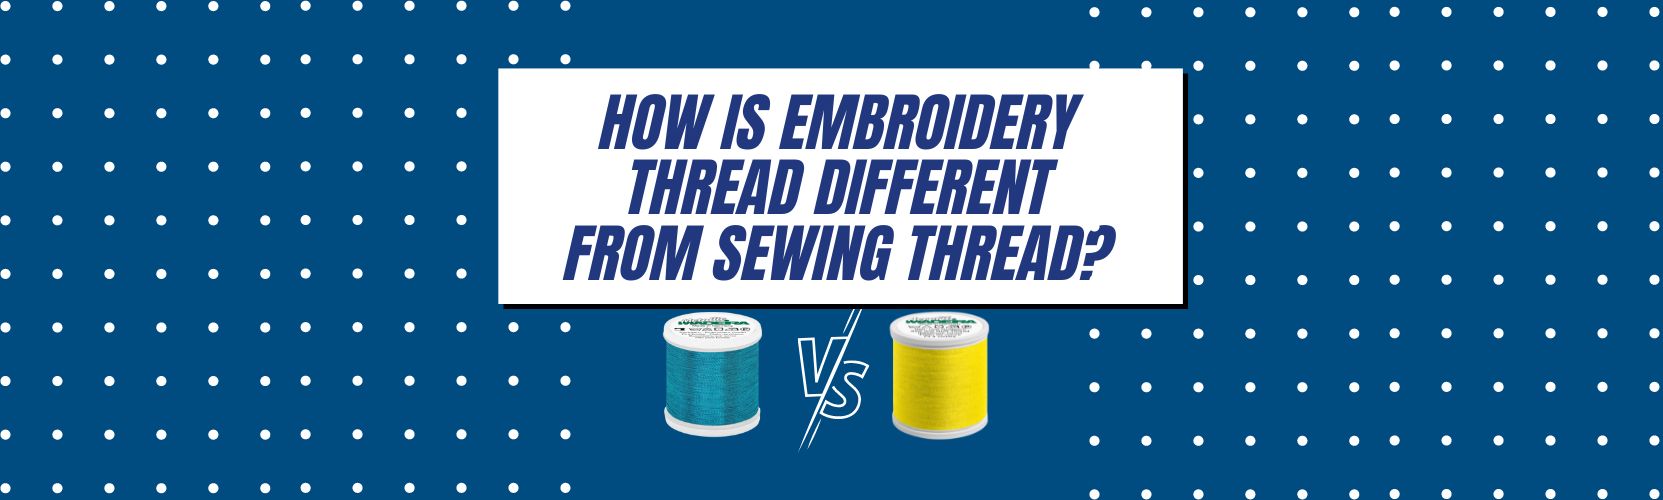 How Is Embroidery Thread Different From Sewing Thread?